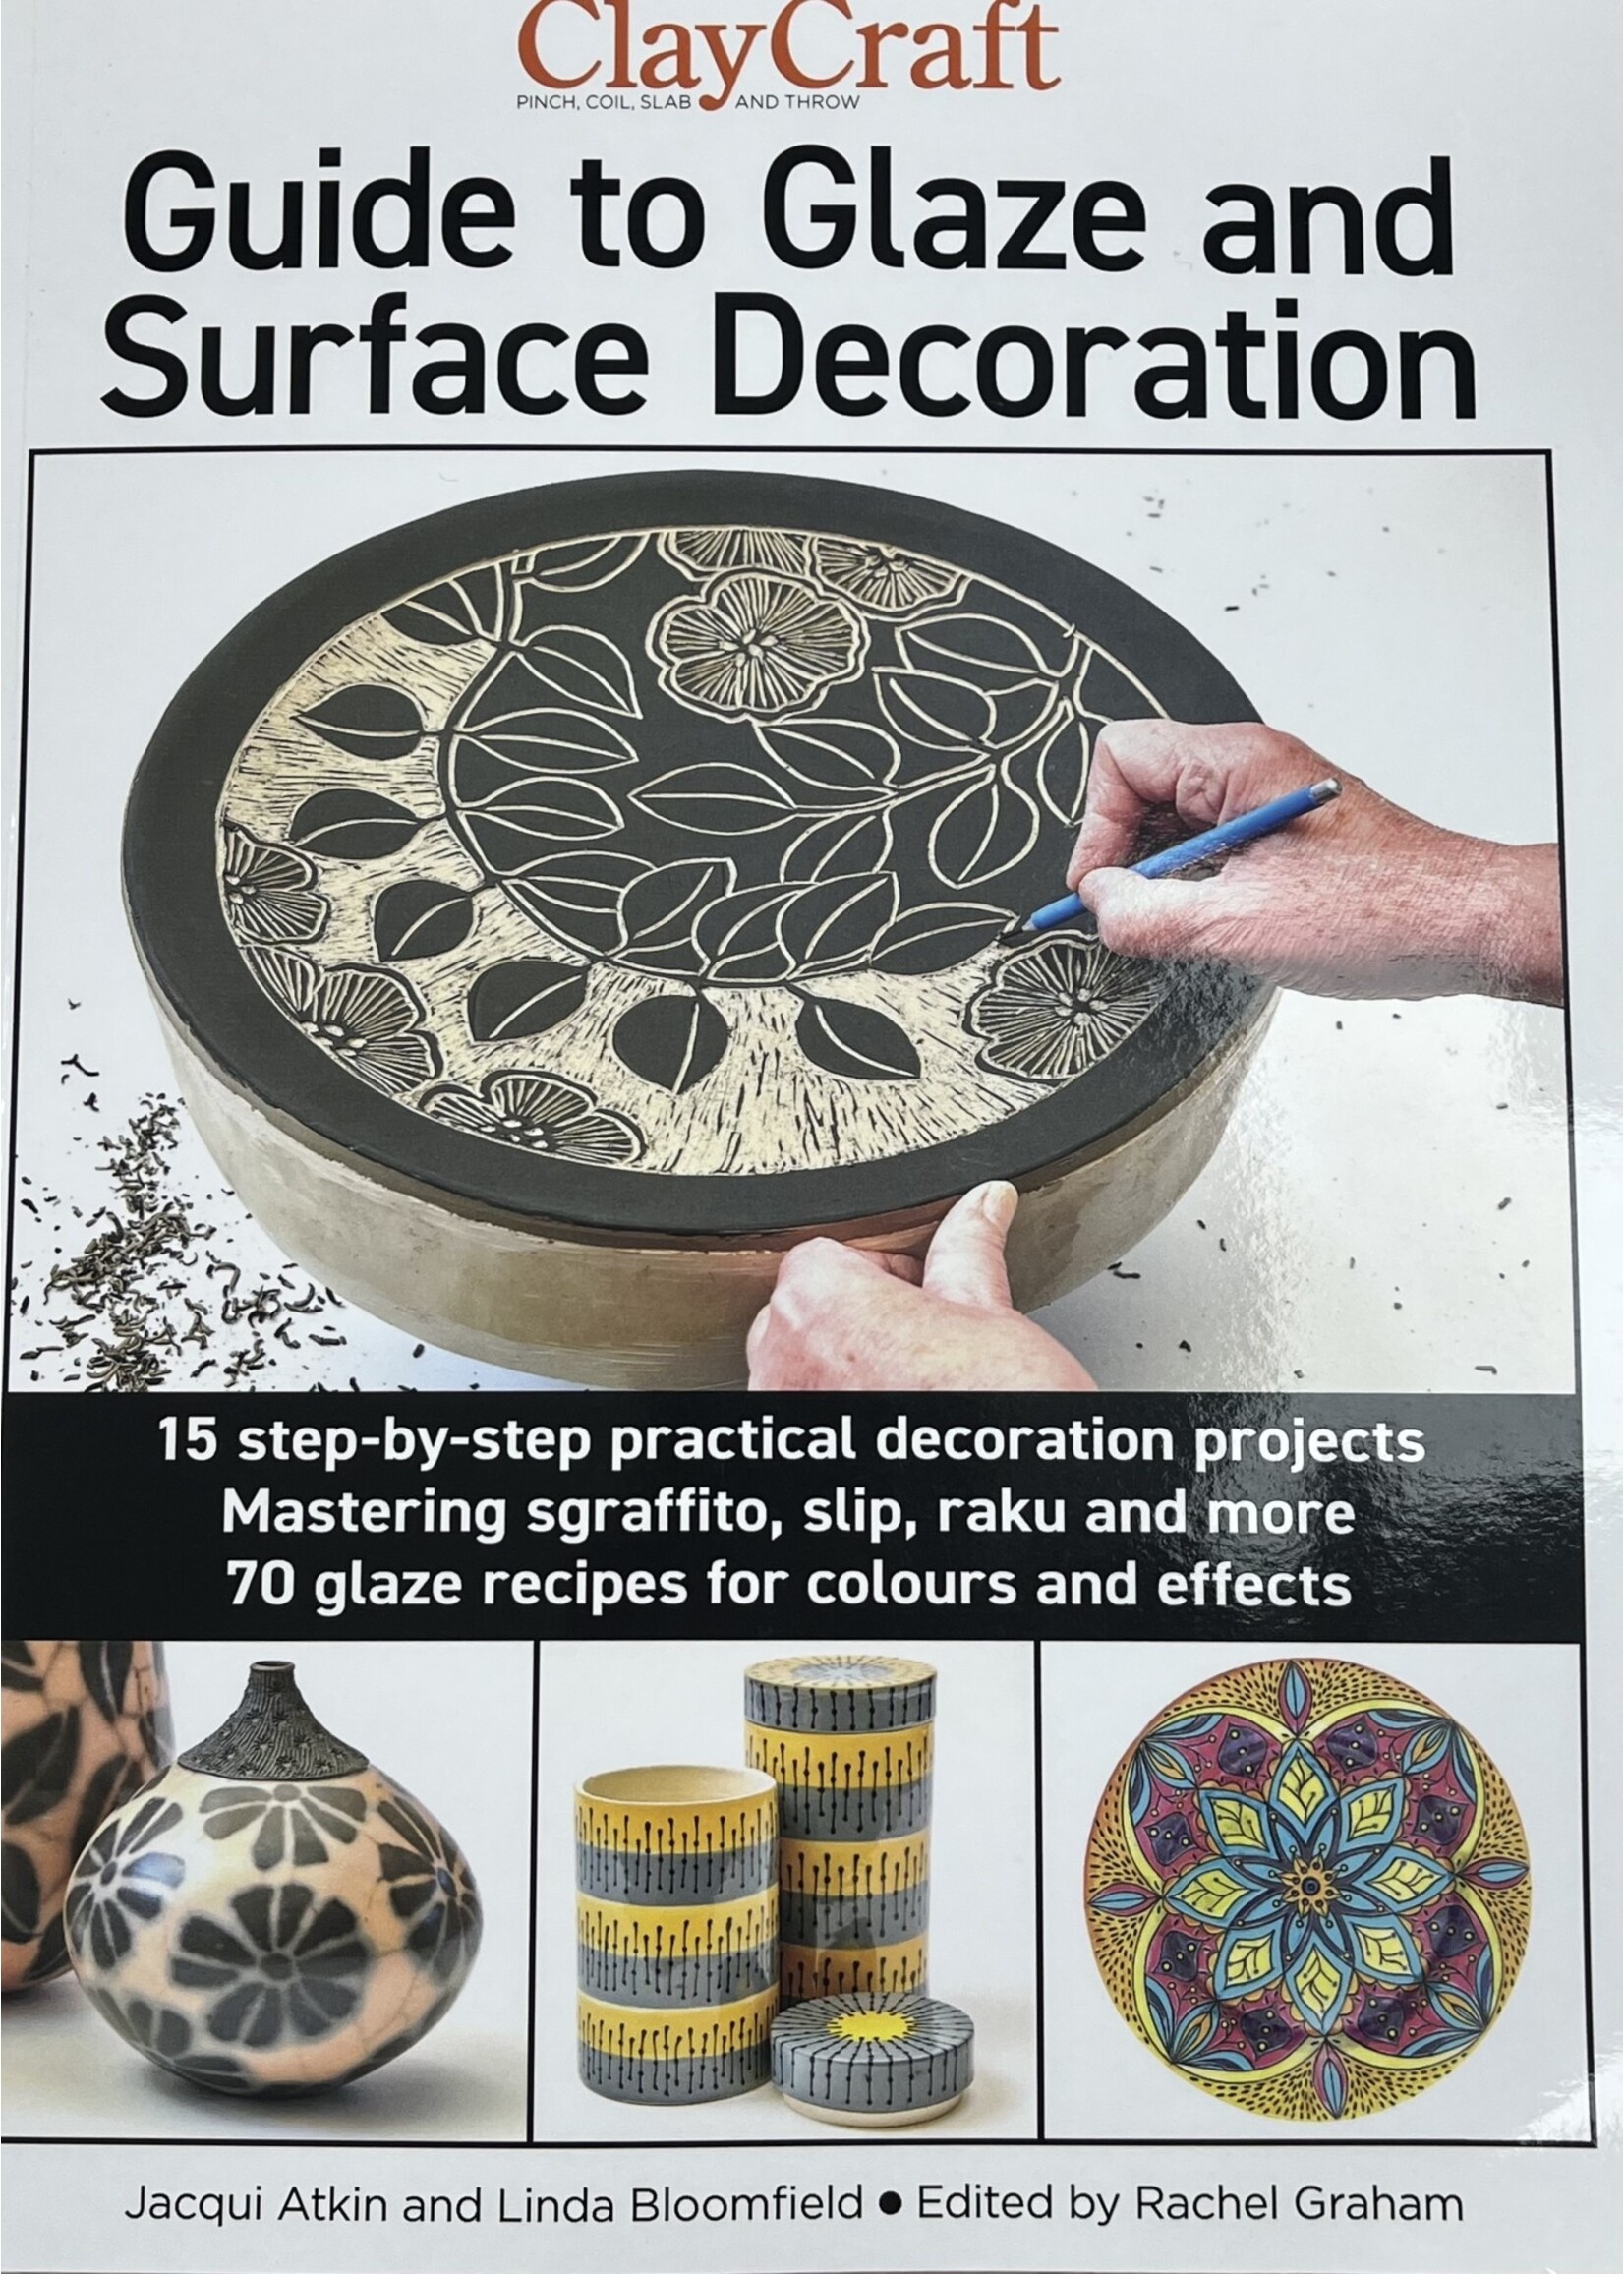 Guide to glaze and surface decoration